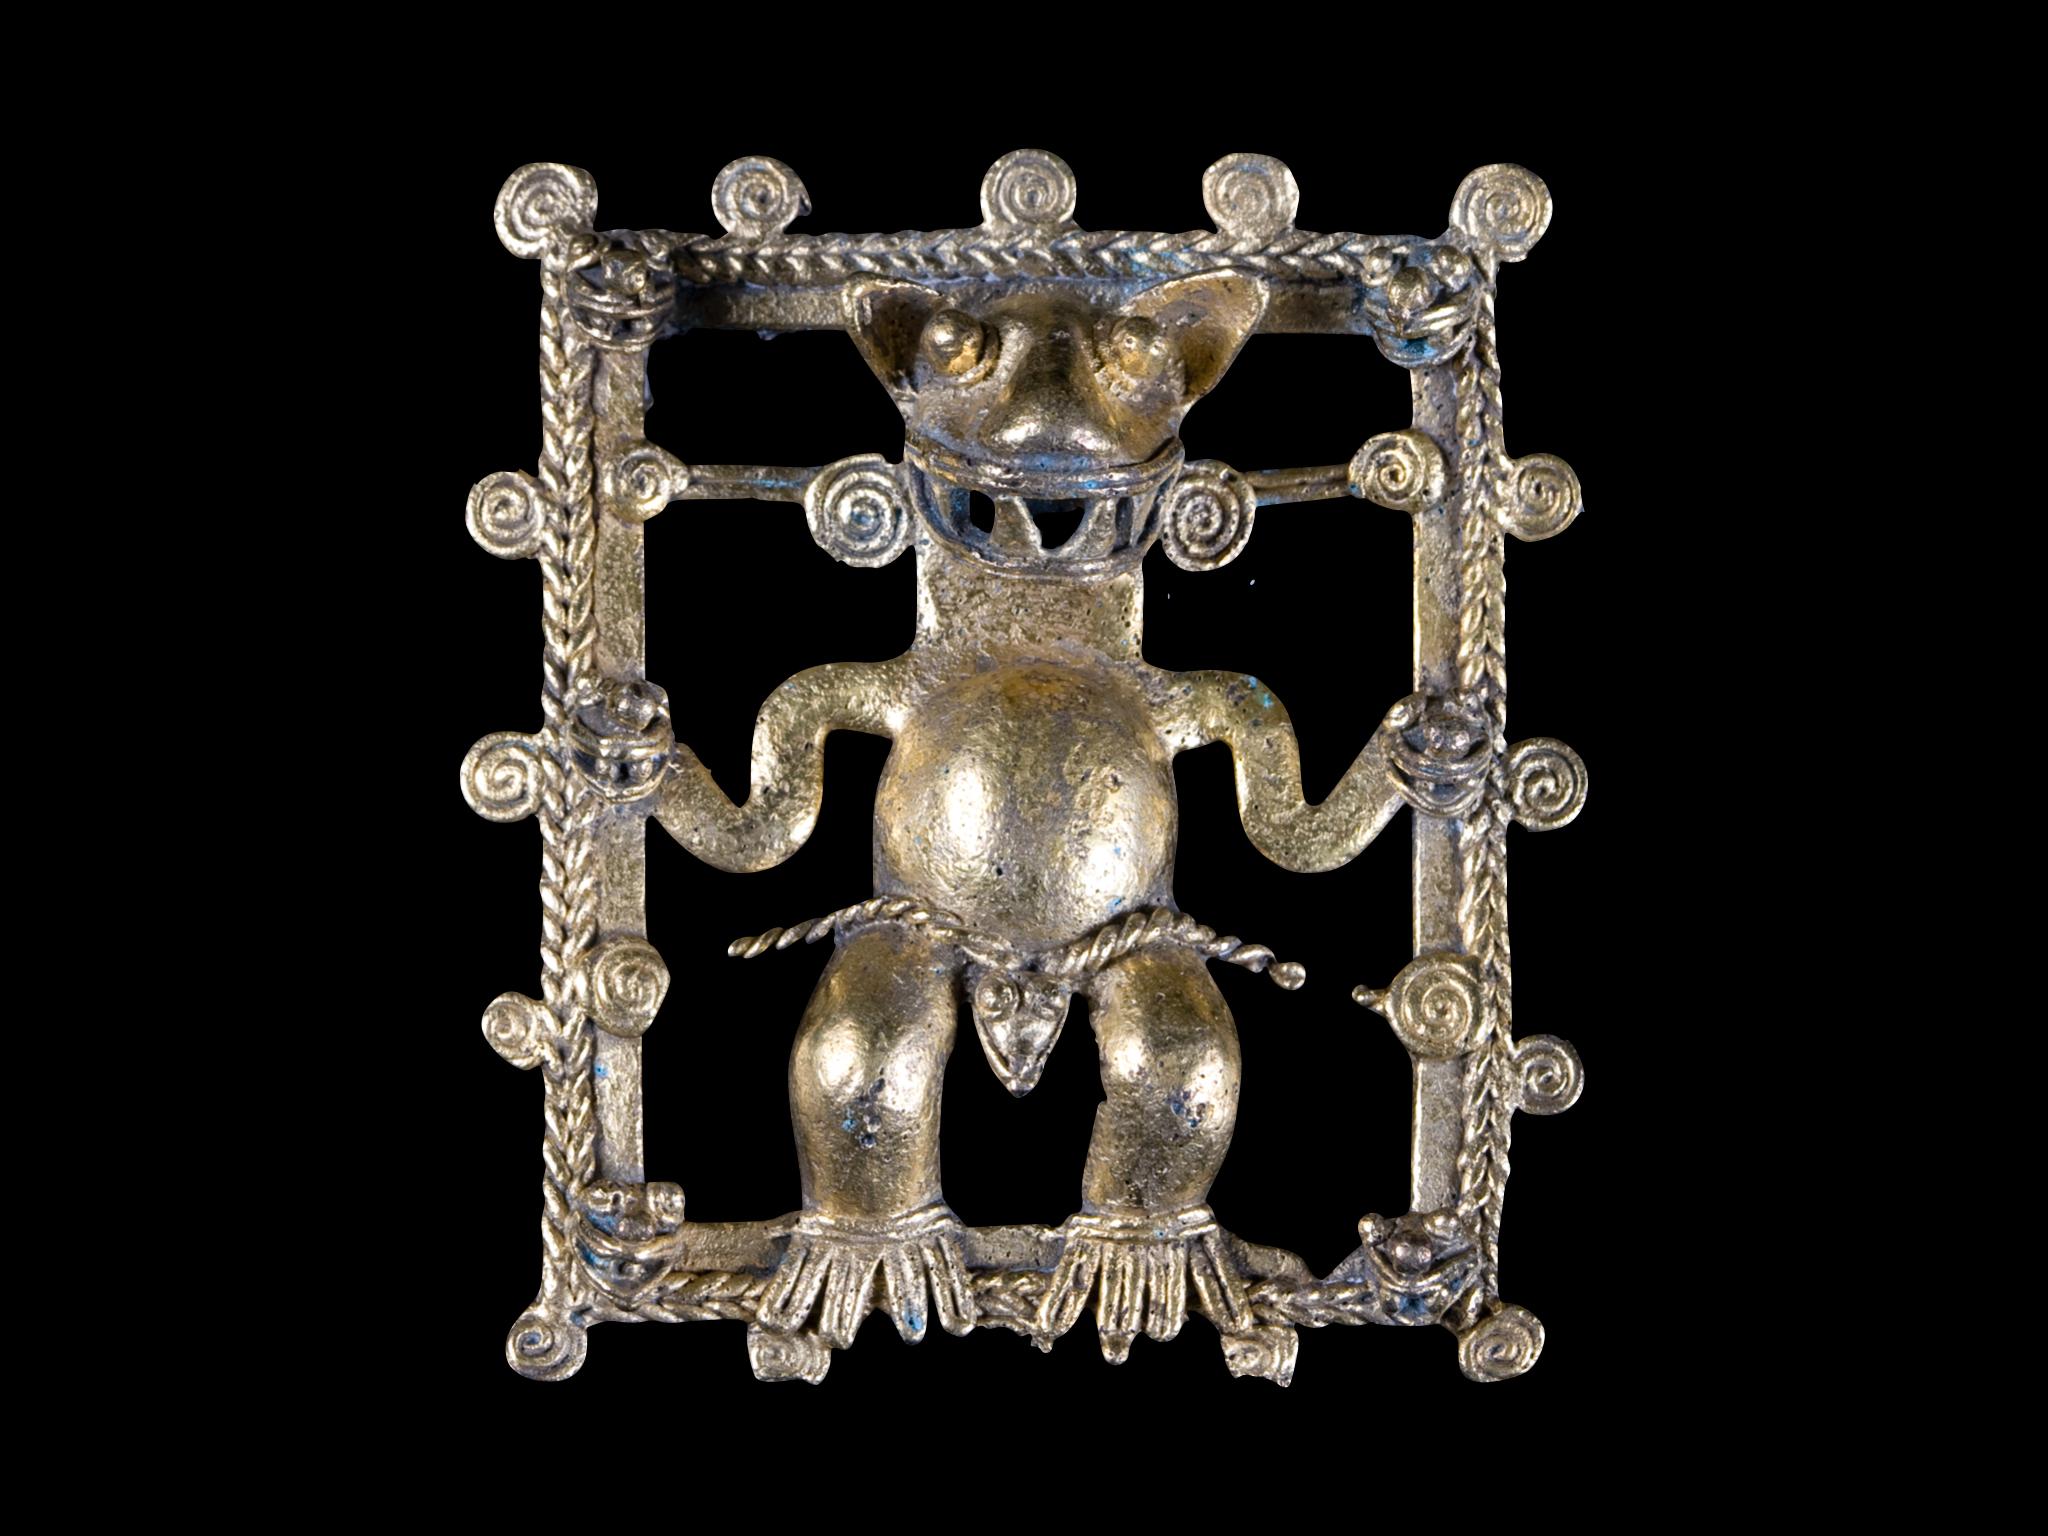 Southern Costa Rica or Western Panama, circa 800 to 1500 AD. A very fine example of the goldwork of the Veraguas-Chiriqui-Diquis region. A pendant in Carbonera style of a supernatural being, a composite monster with human torso and feline (probably